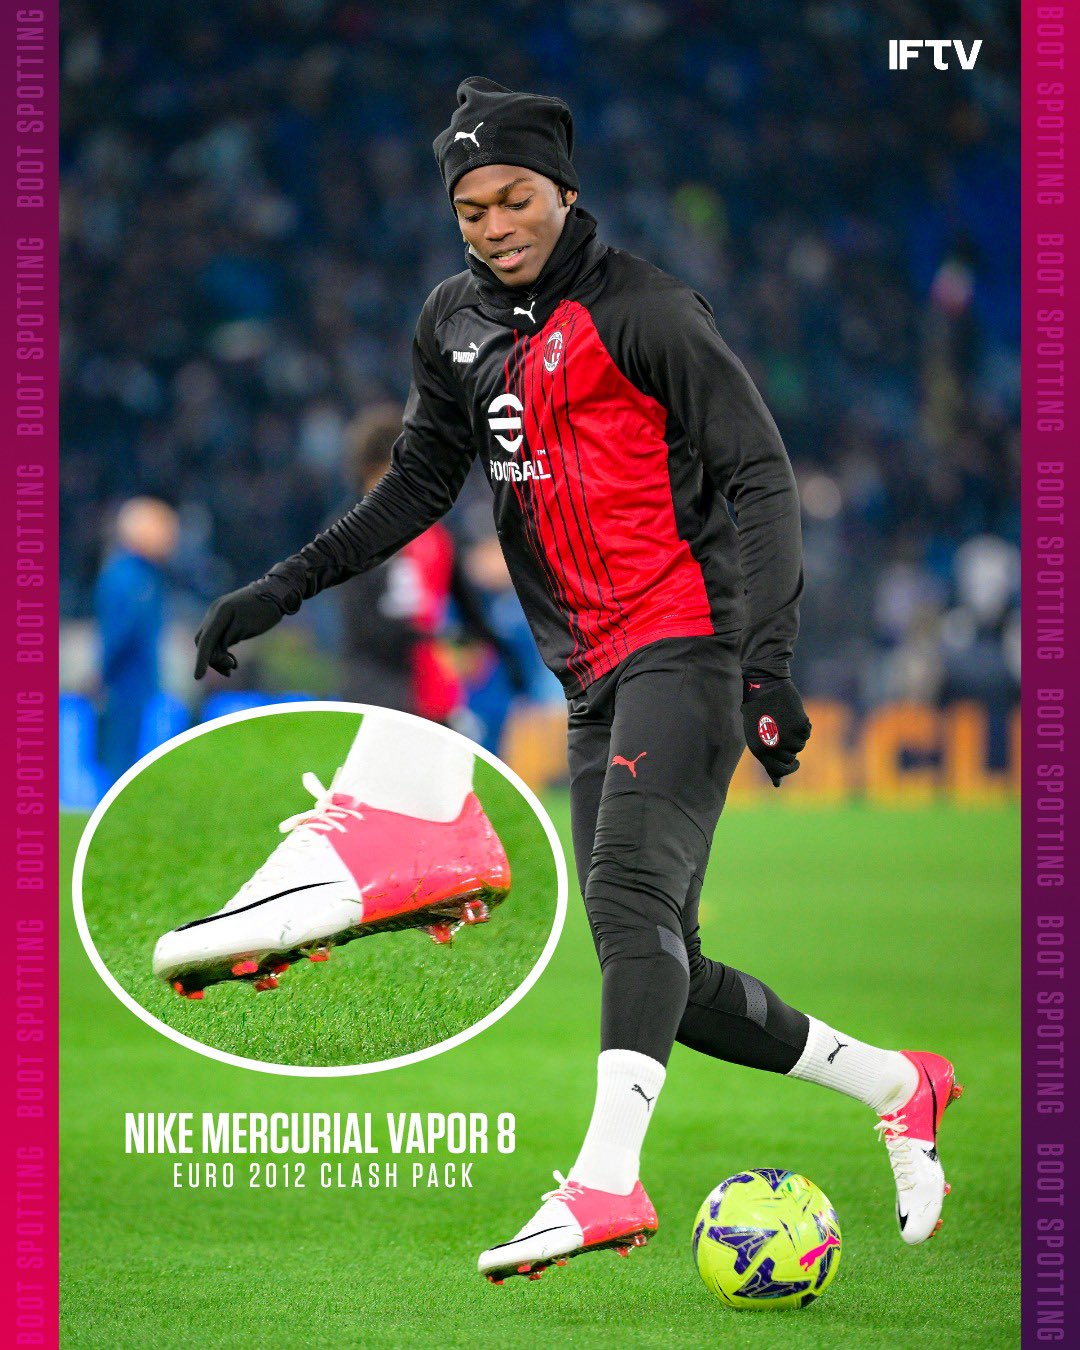 Twitter-এ Italian Football TV: "🔎 Boot Spotting - Rafa Leao Leao who is potentially out of contract with Adidas was seen rocking the Nike Mercurial Vapor DNA' (Remake of the original